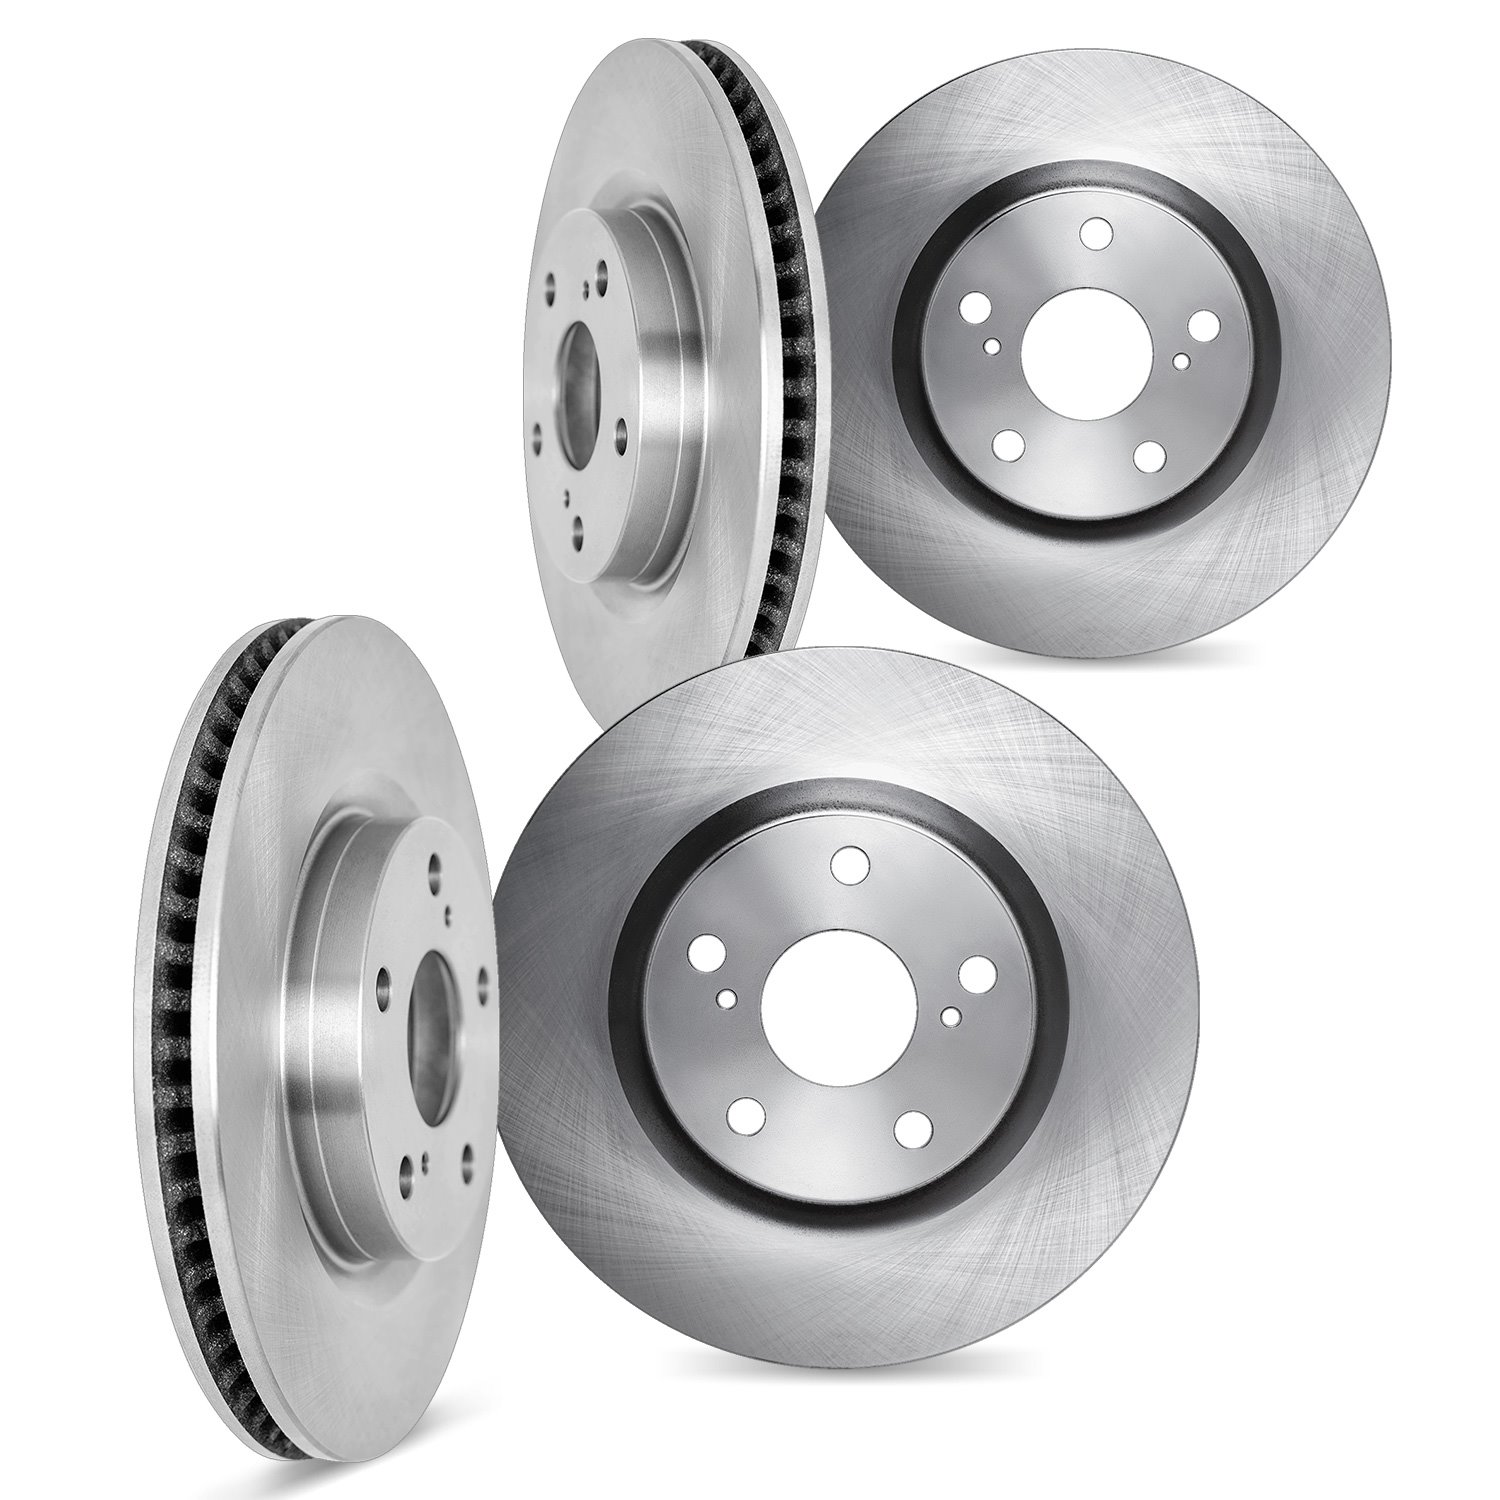 6004-42043 Brake Rotors, Fits Select Mopar, Position: Front and Rear